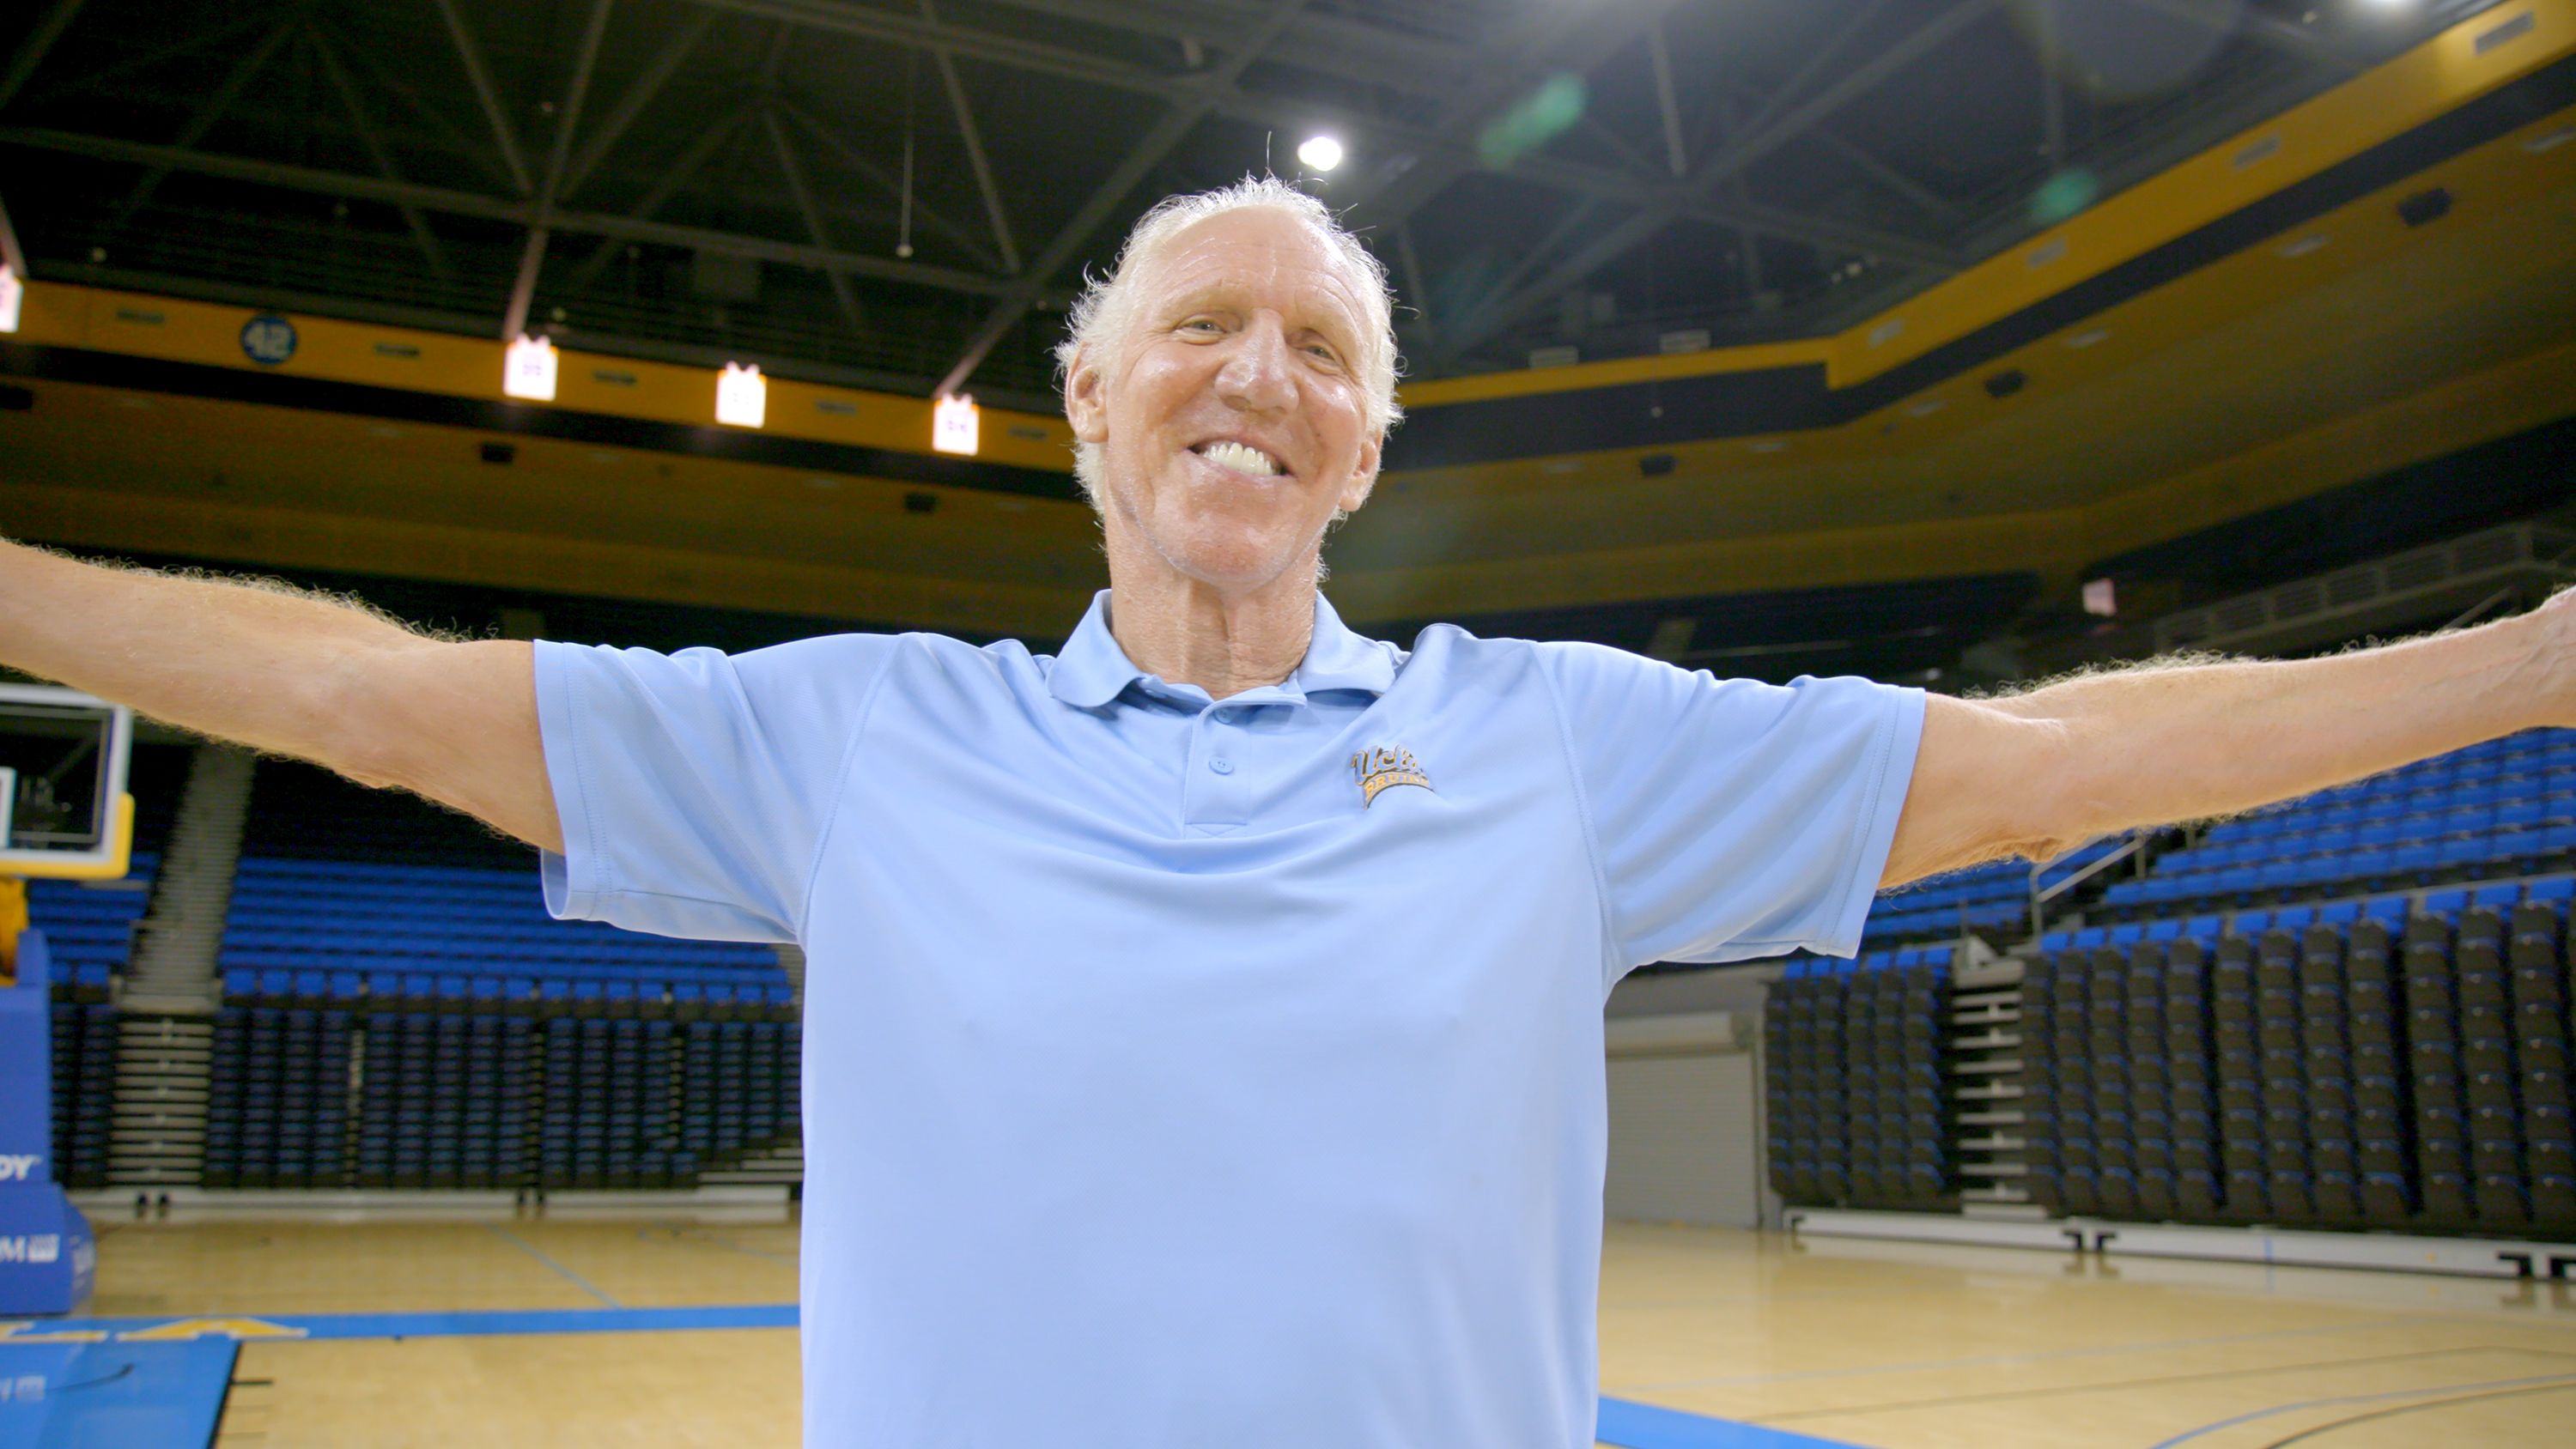 Love or hate him, Bill Walton insists he's 'The Luckiest Guy in the World